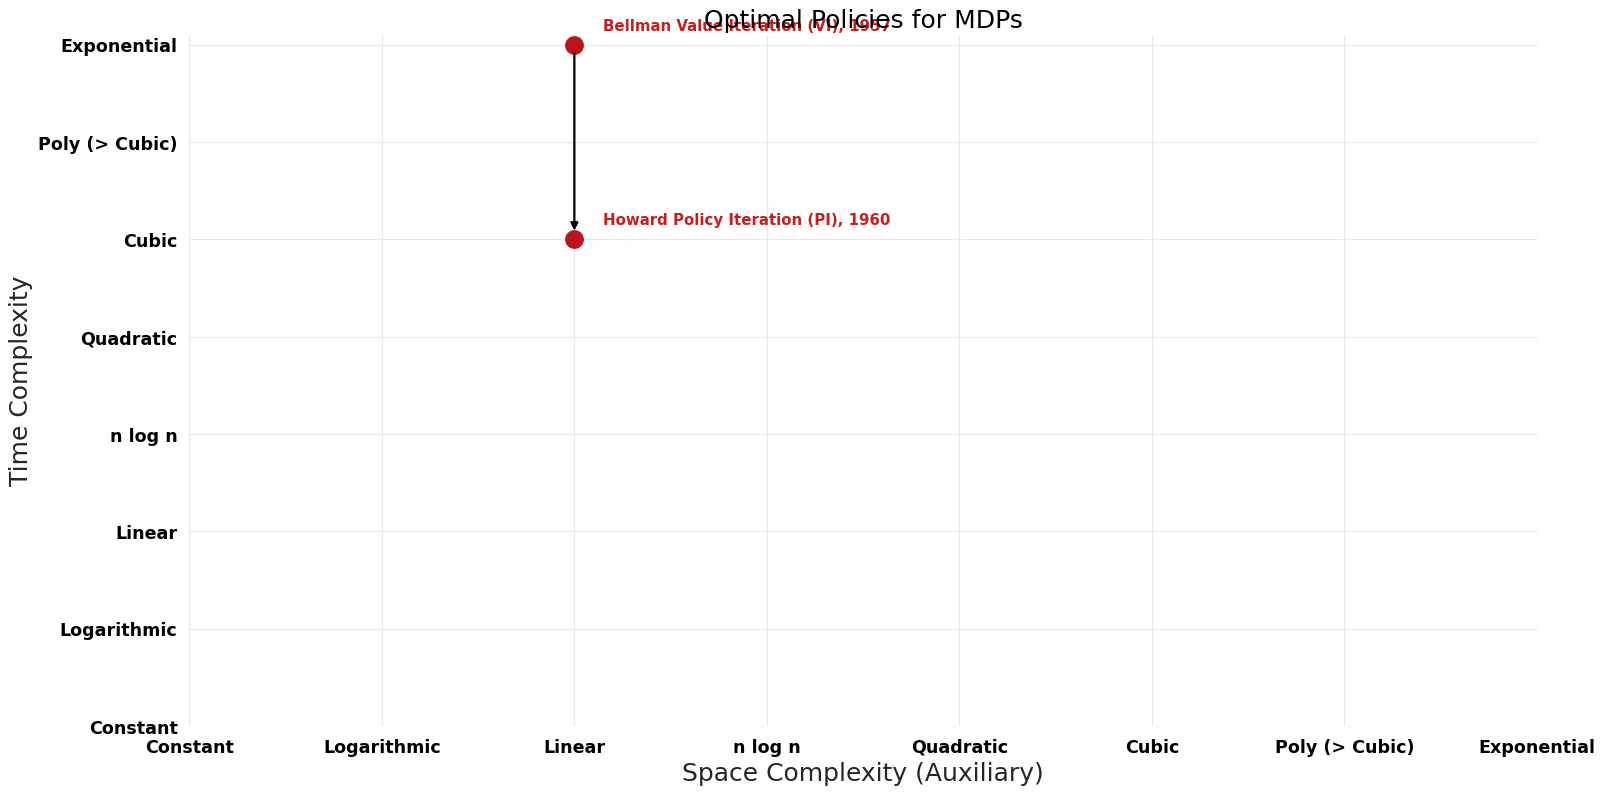 File:Optimal Policies for MDPs - Pareto Frontier.png